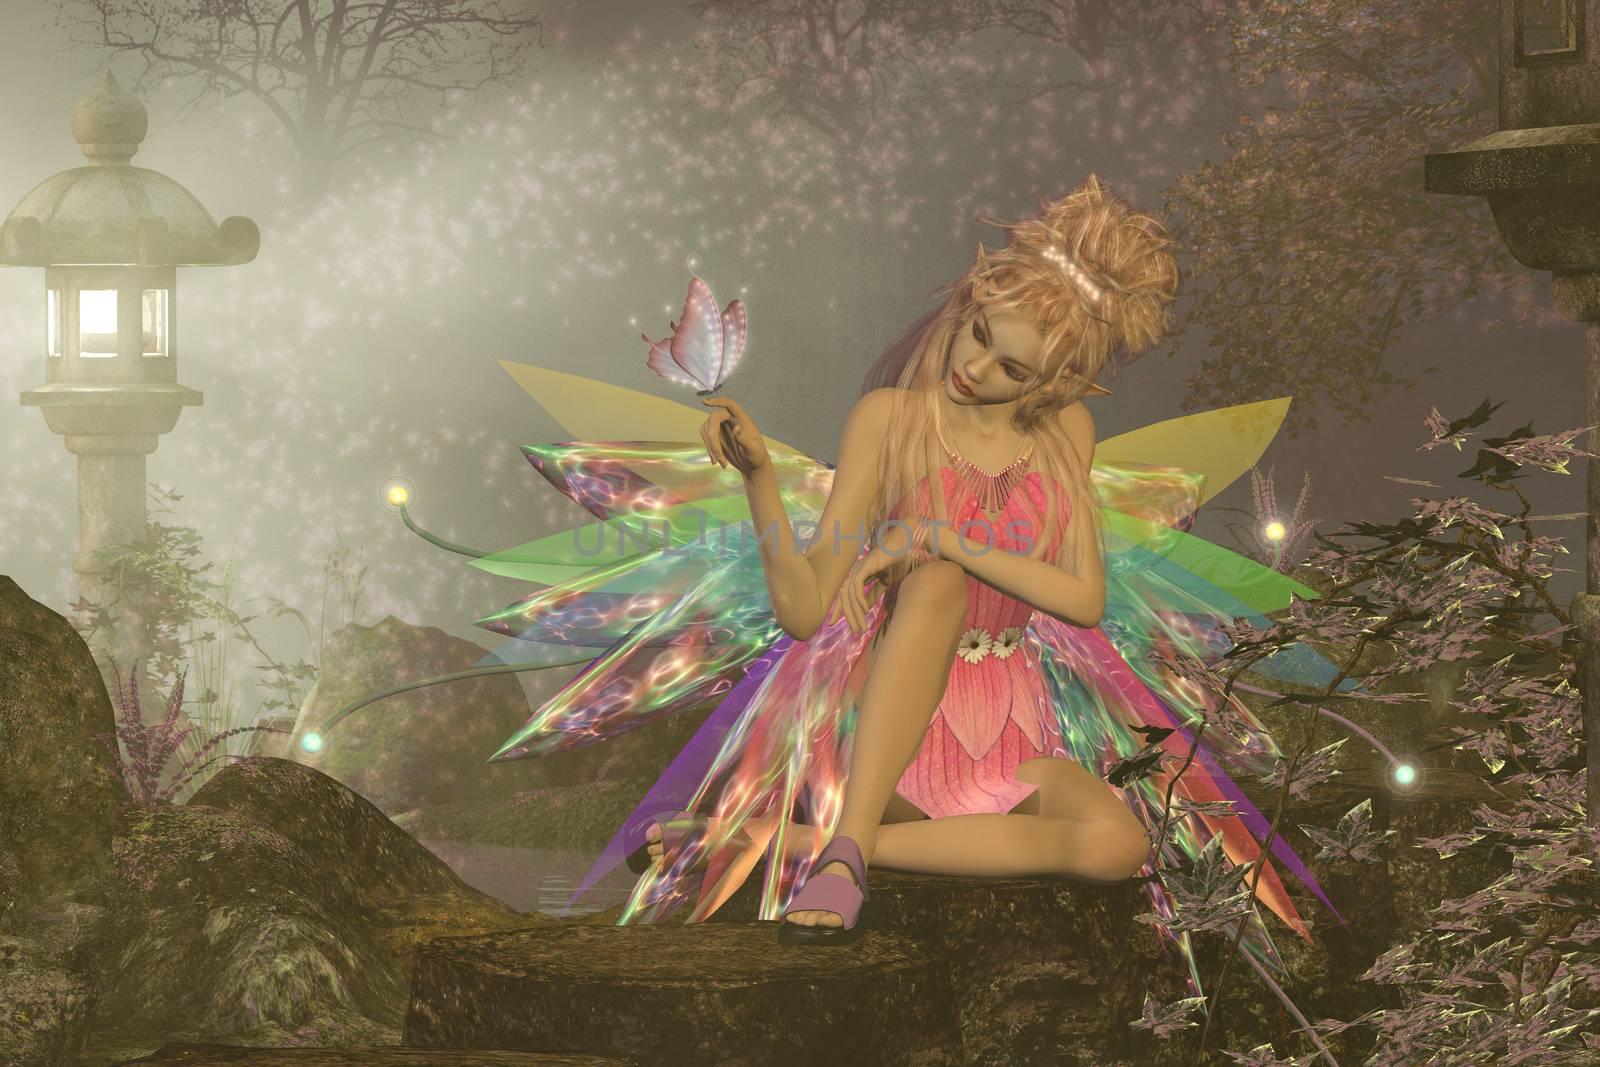 A small fairy with wings waits as a pink butterfly lands on her finger in a magical woodland forest.